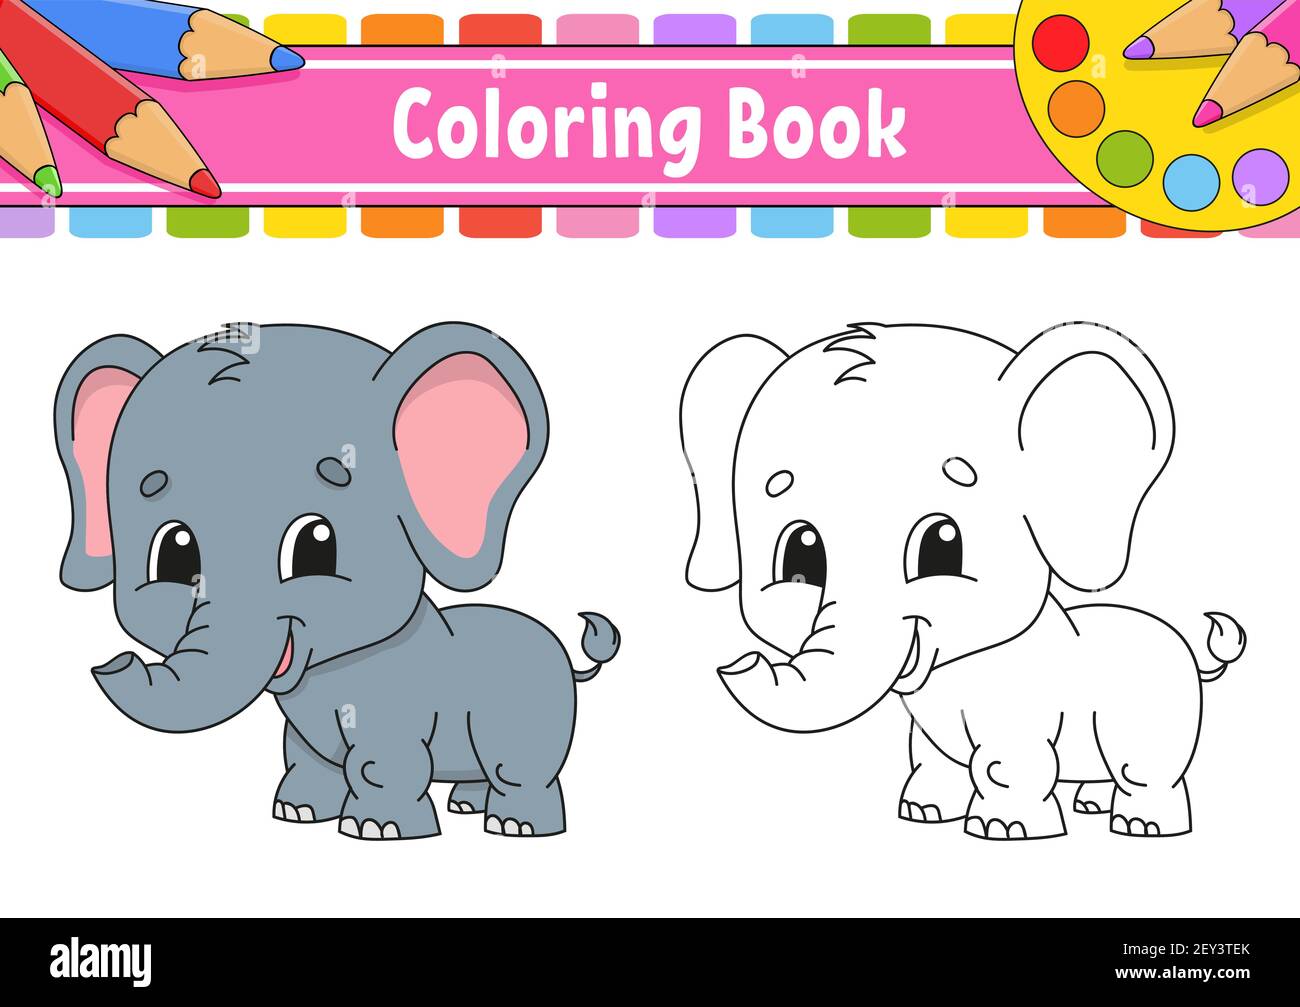 Coloring book for kids. Cartoon character. Vector illustration. Black contour silhouette. Isolated on white background. Animal theme. Stock Vector